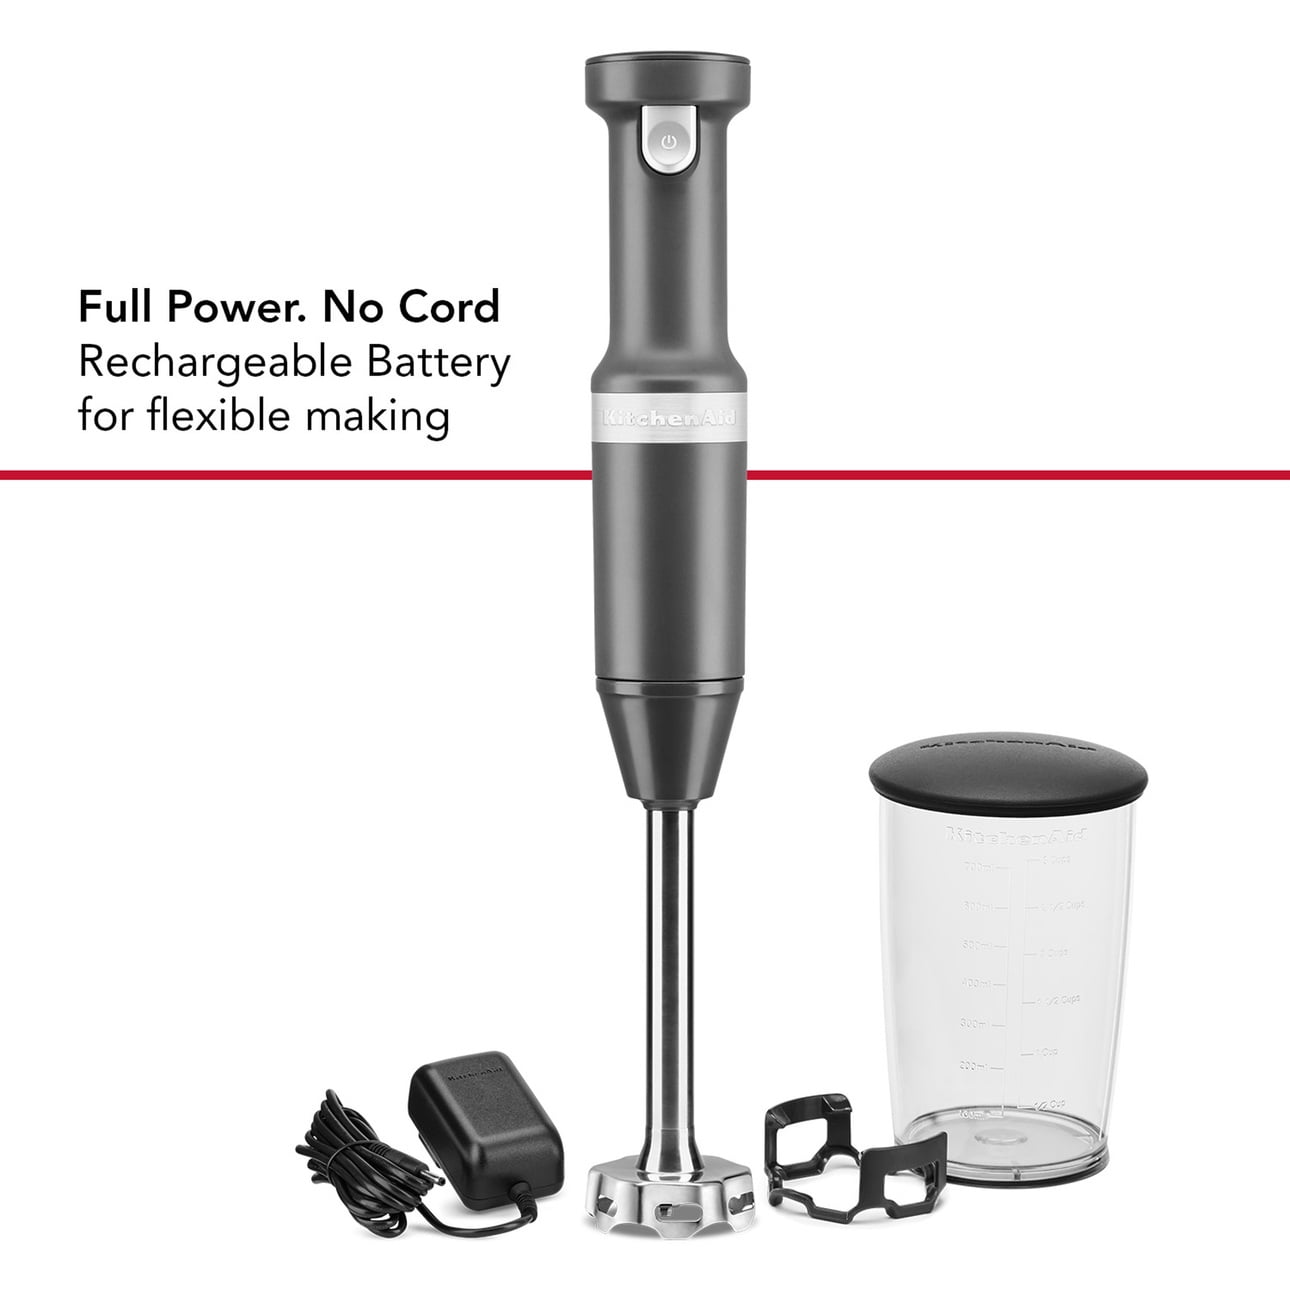 KHBBV53WH by KitchenAid - Cordless Variable Speed Hand Blender